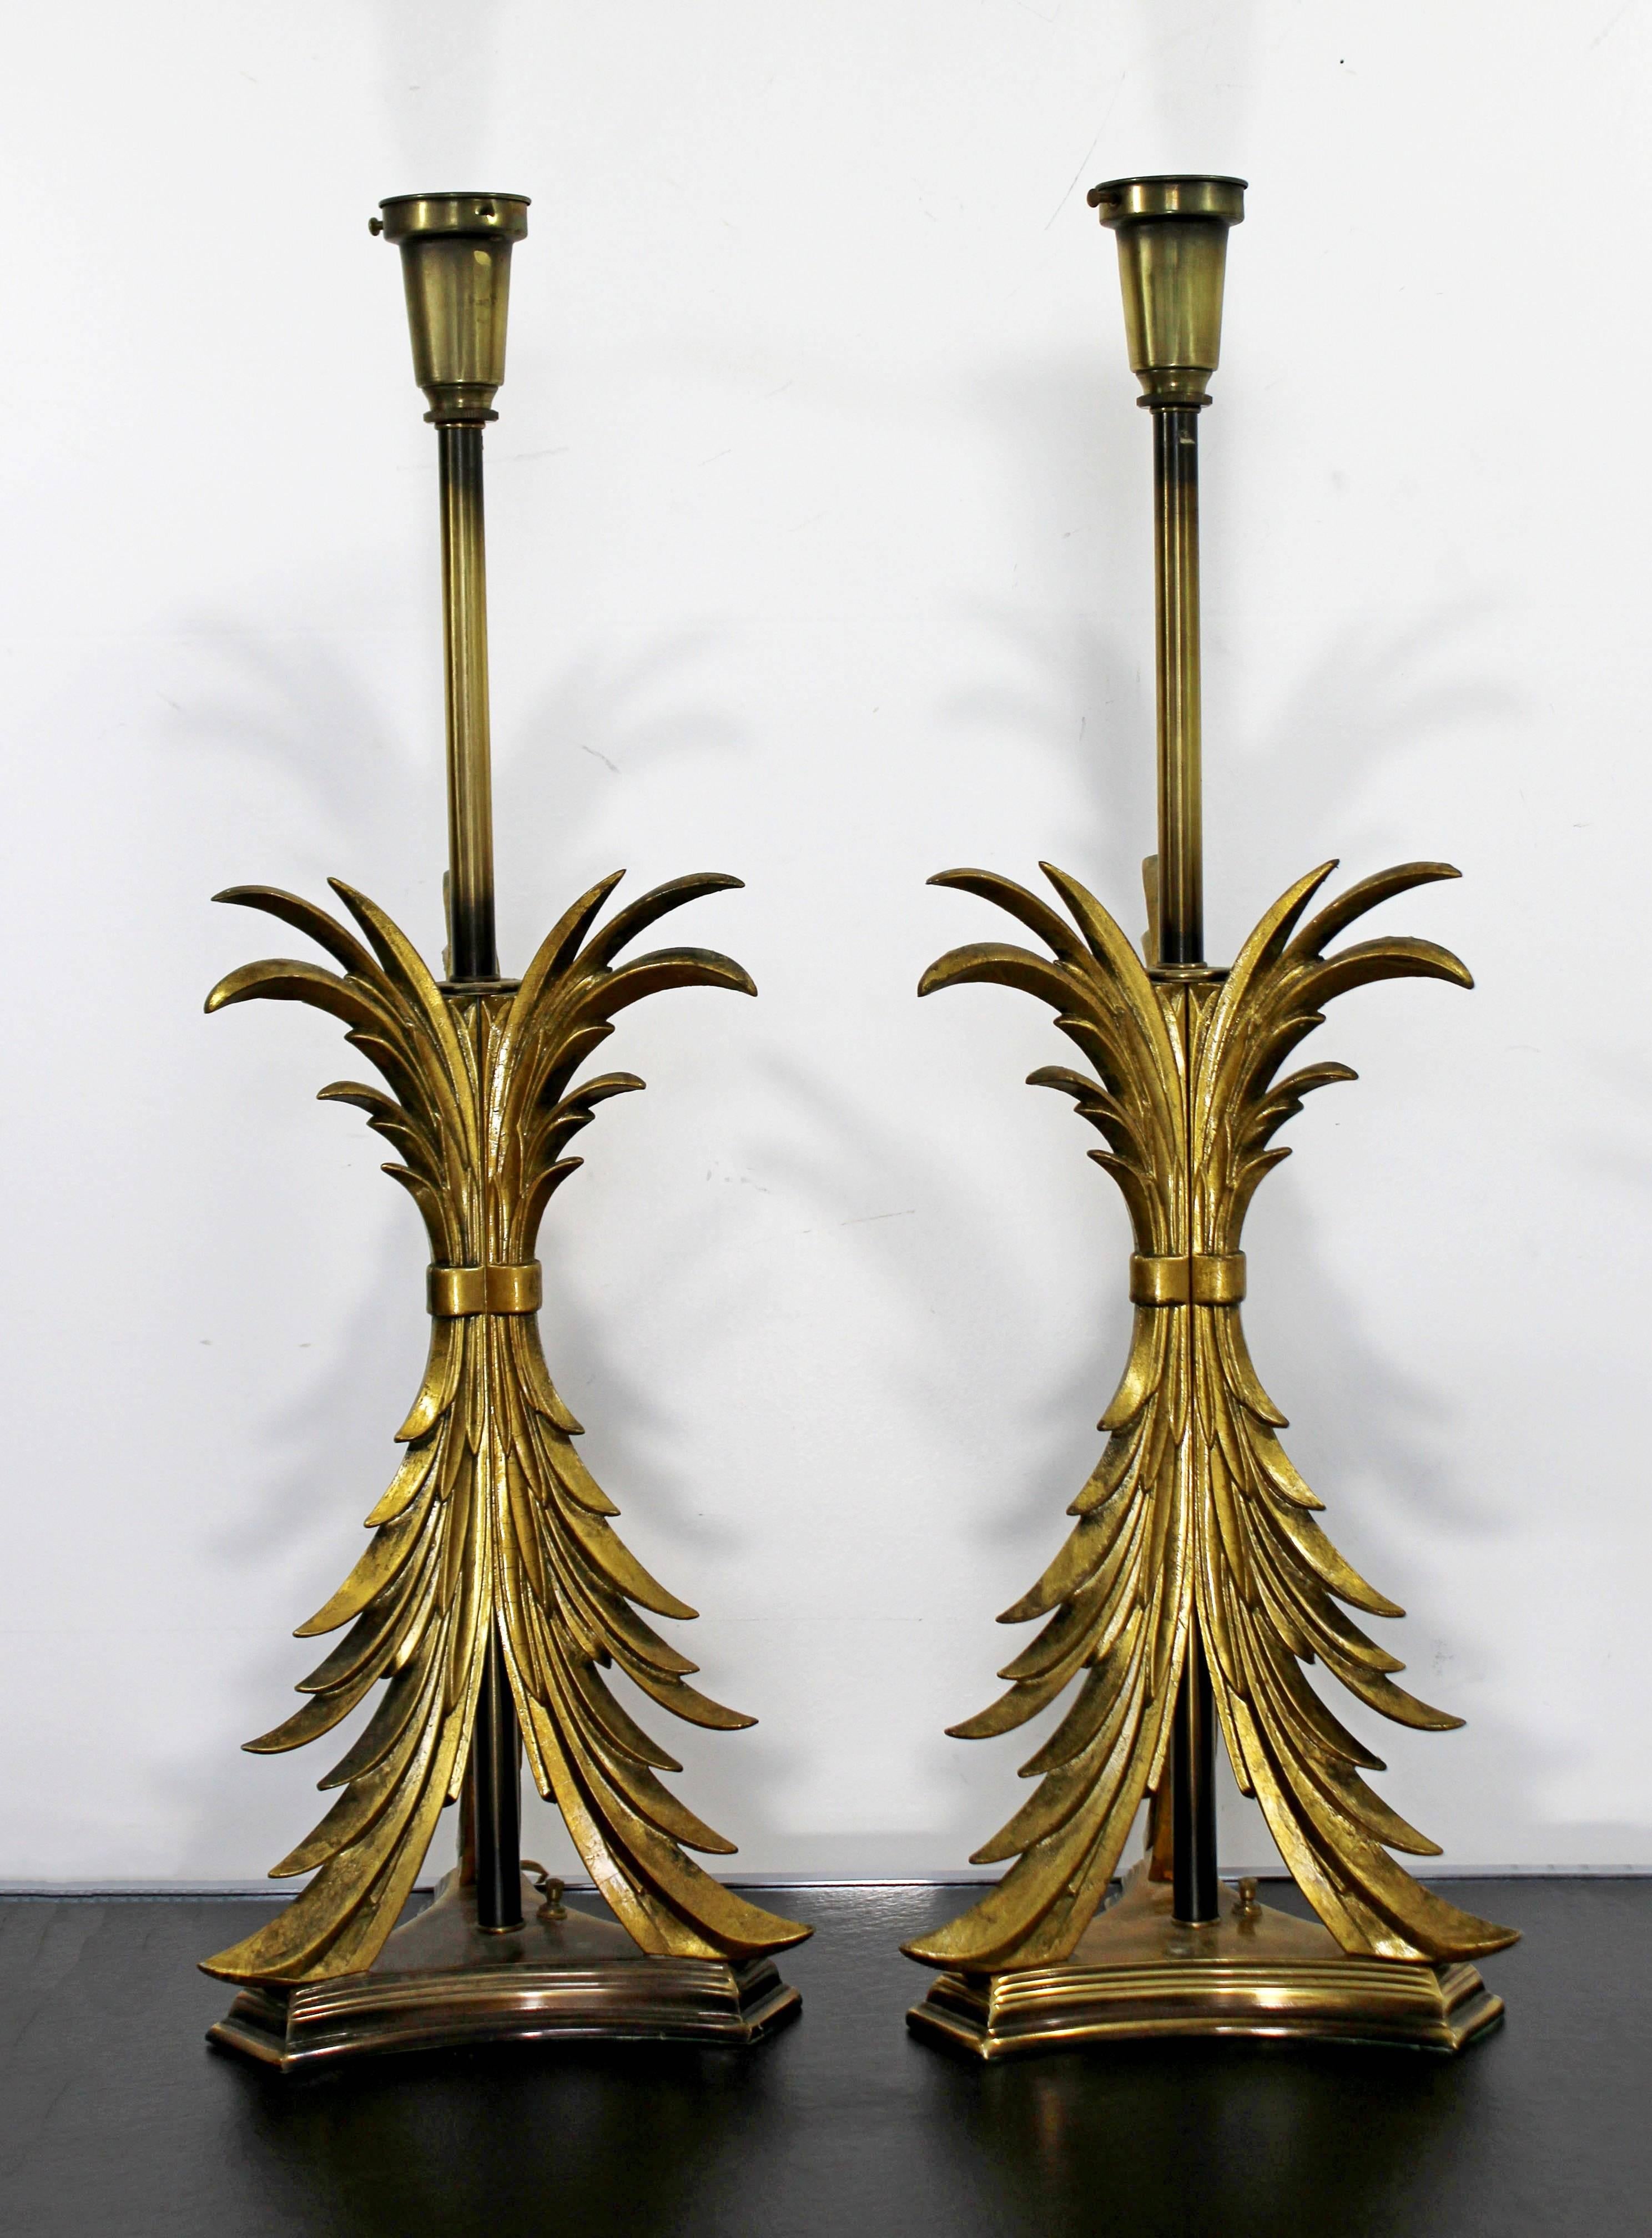 For your consideration is a wonderful pair of Hollywood Regency, solid brass table lamps by Chapman, circa the 1980s. In excellent condition. The dimensions are 10